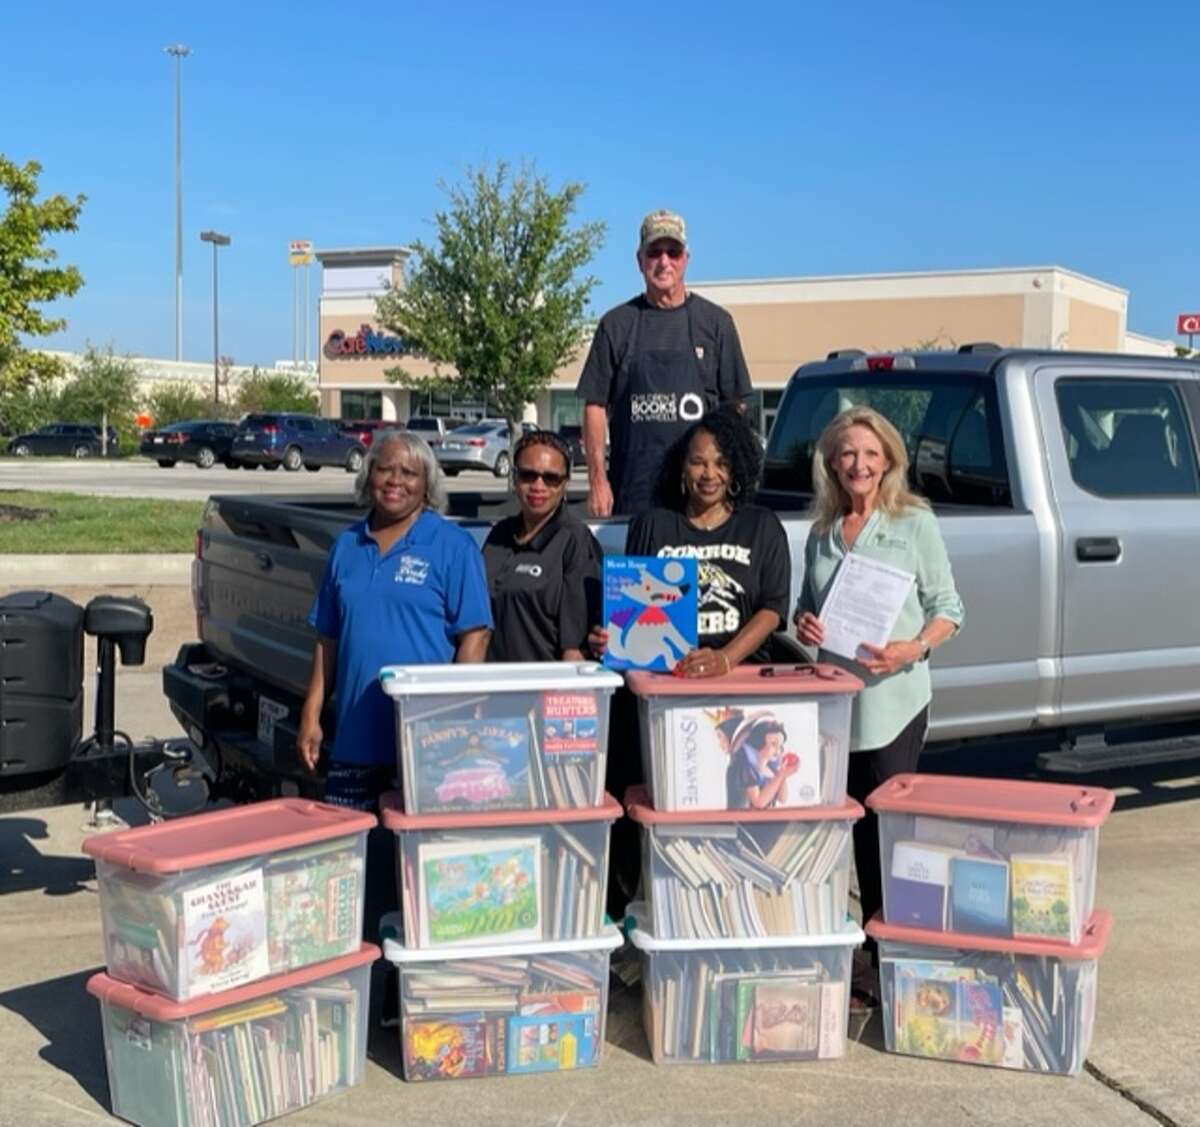 Children's Books on Wheels, a Conroe area literacy nonprofit, delivered around 4,000 free books to the Uvalde Consolidated Independent School District with the help of Helen and Jim Thornton, who delivered the books on their way to a hunting trip. Constance Borders, left, Mary Butler, Jim Thornton, Rita Wiltz, and Helen Thornton are shown. 